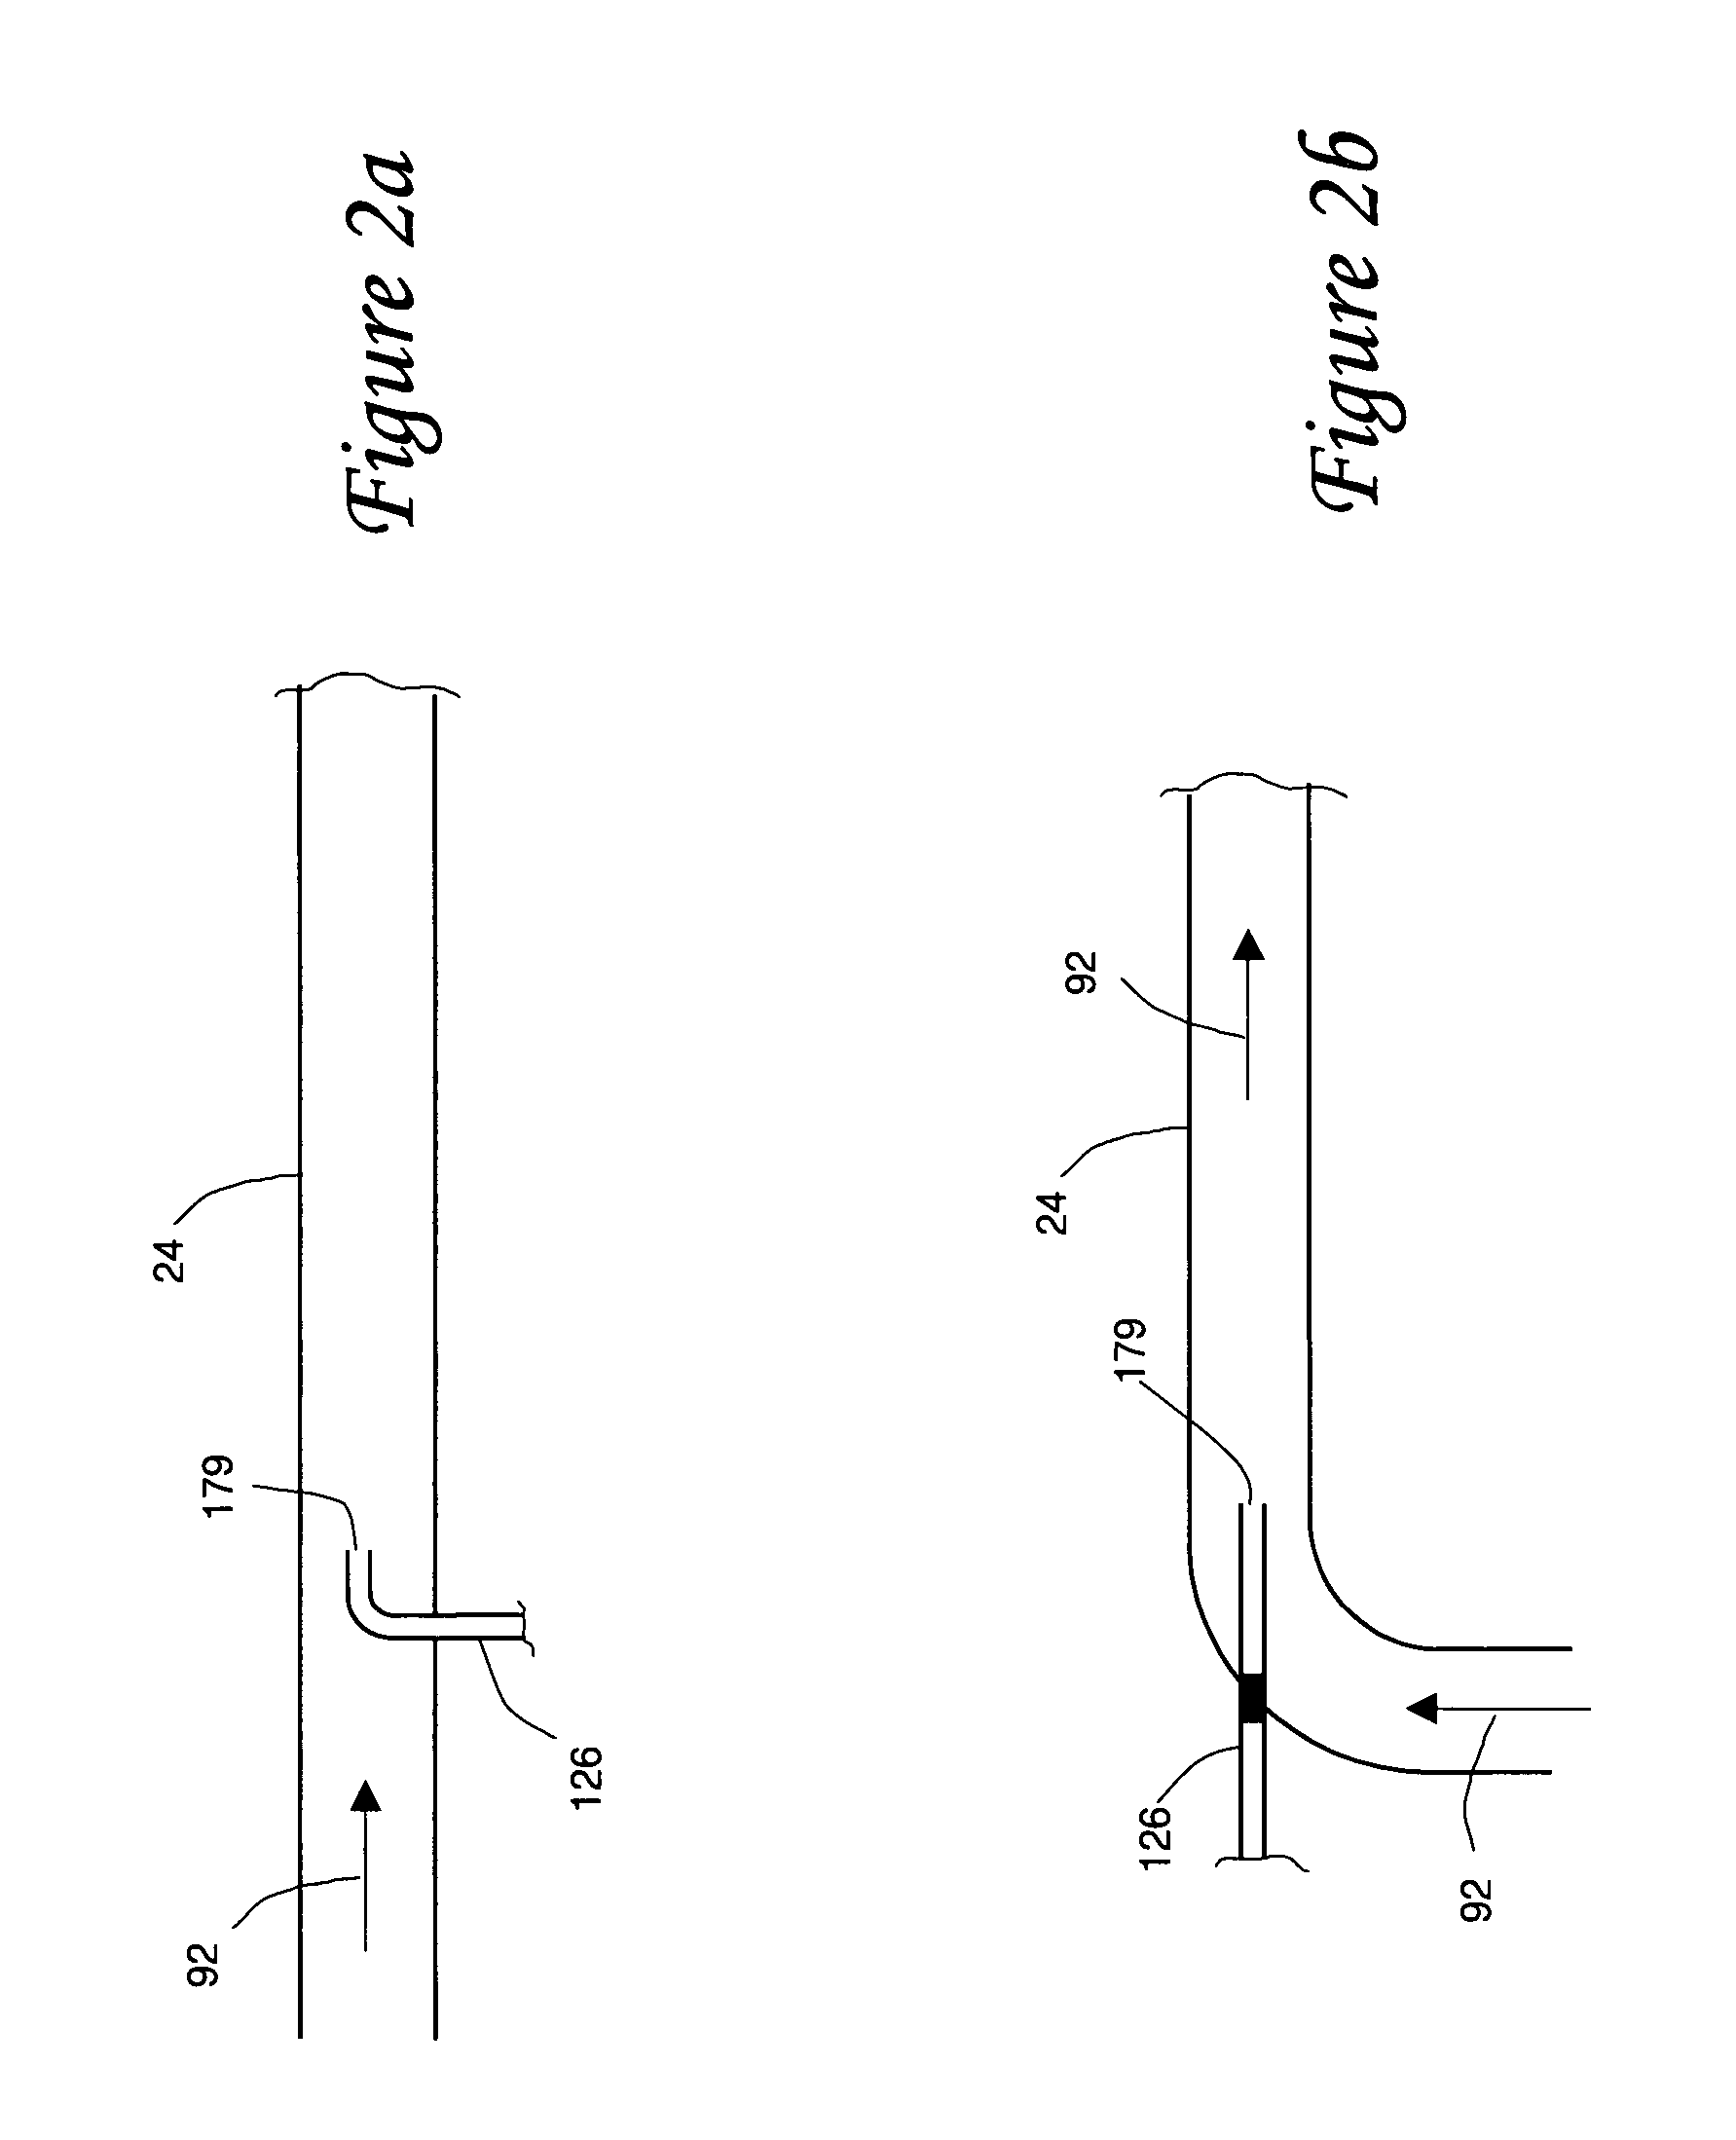 Internal combustion engine/water source system